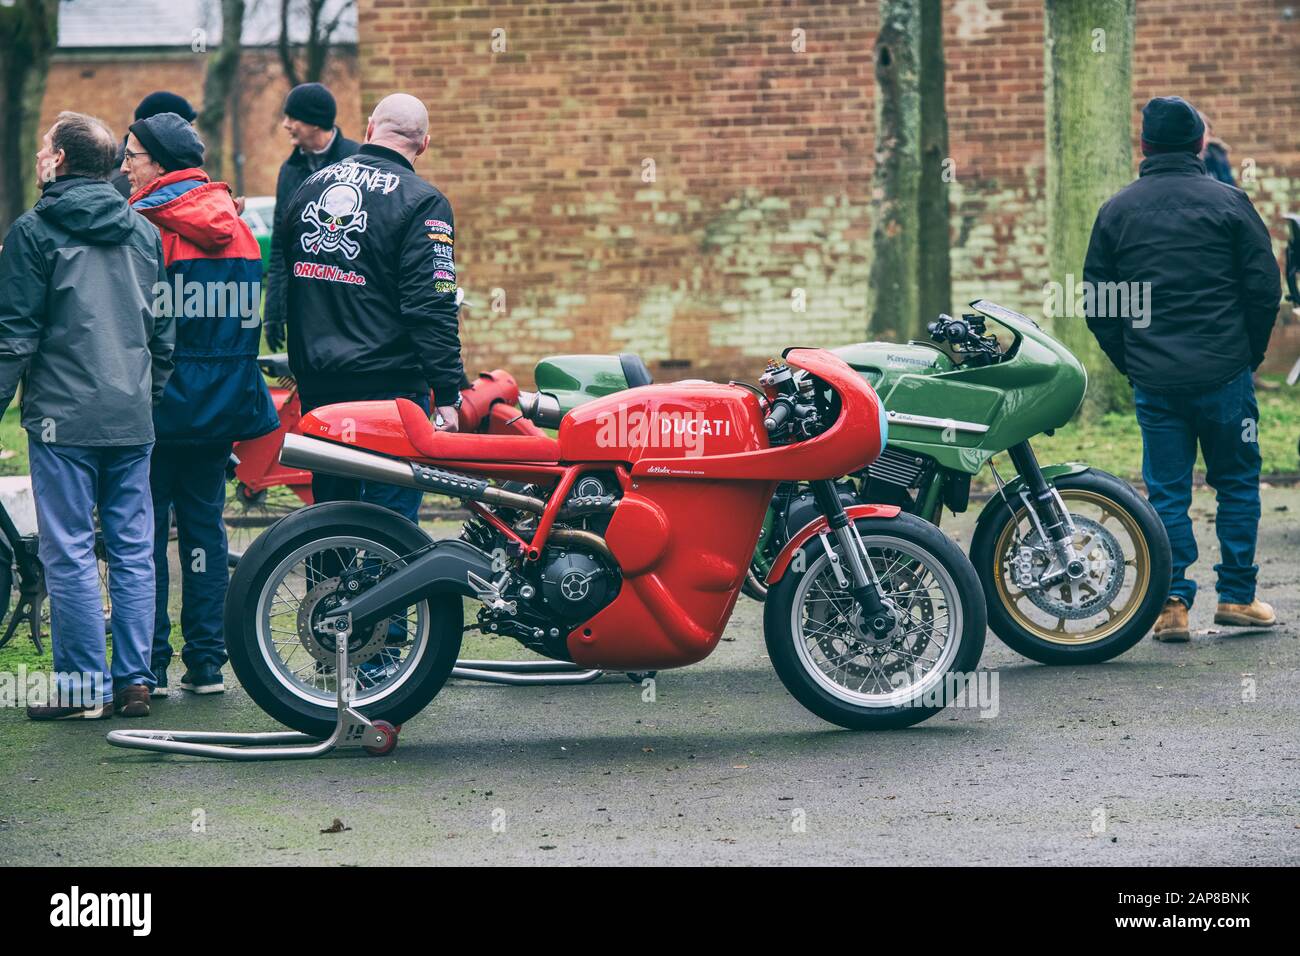 Ducati 803 custom motorcycle at Bicester heritage centre sunday scramble event. Bicester, Oxfordshire, England. Vintage filter applied Stock Photo